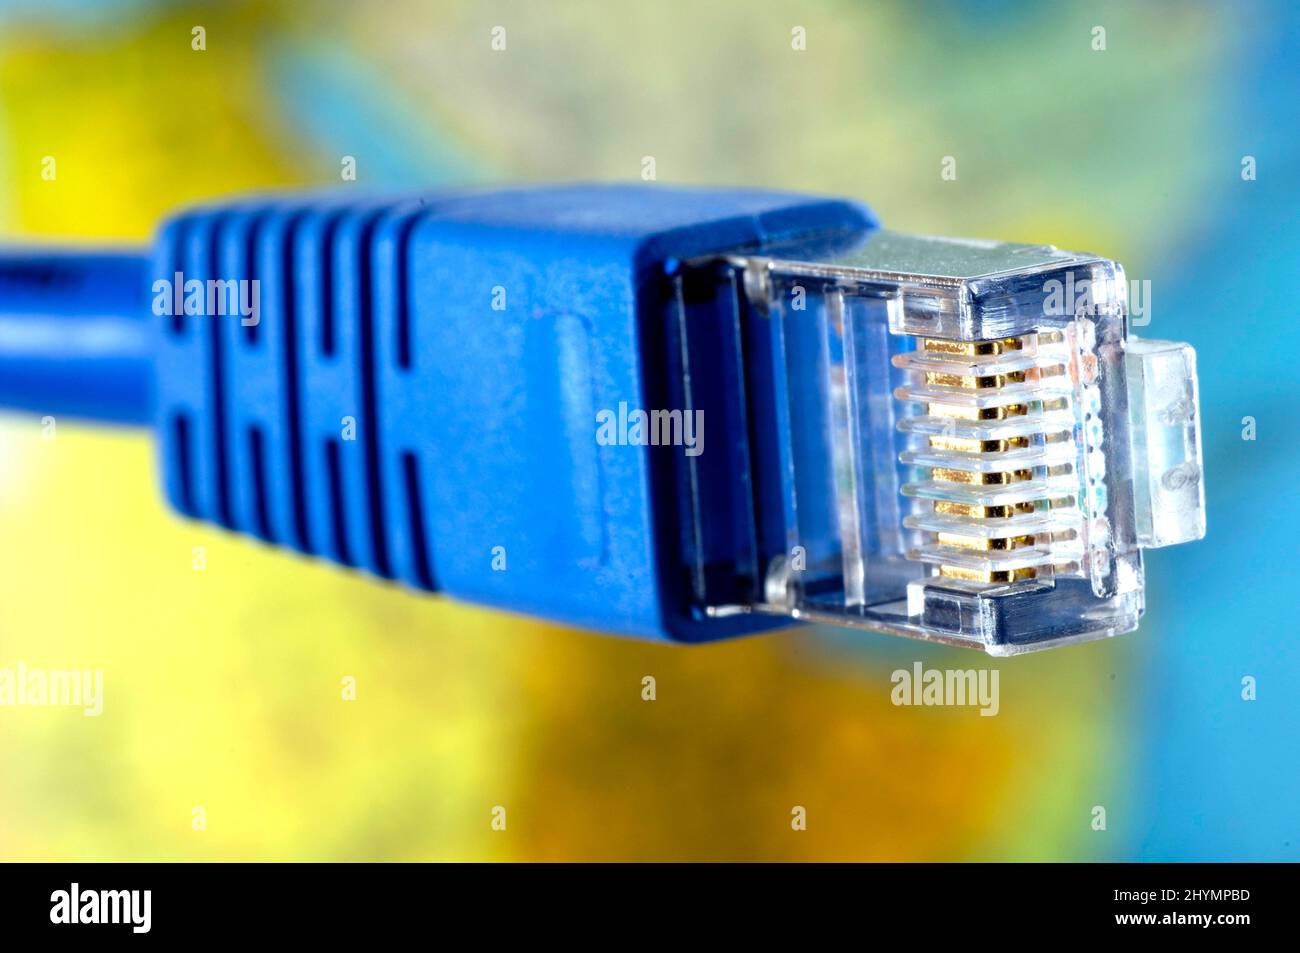 network cable in front of map Stock Photo